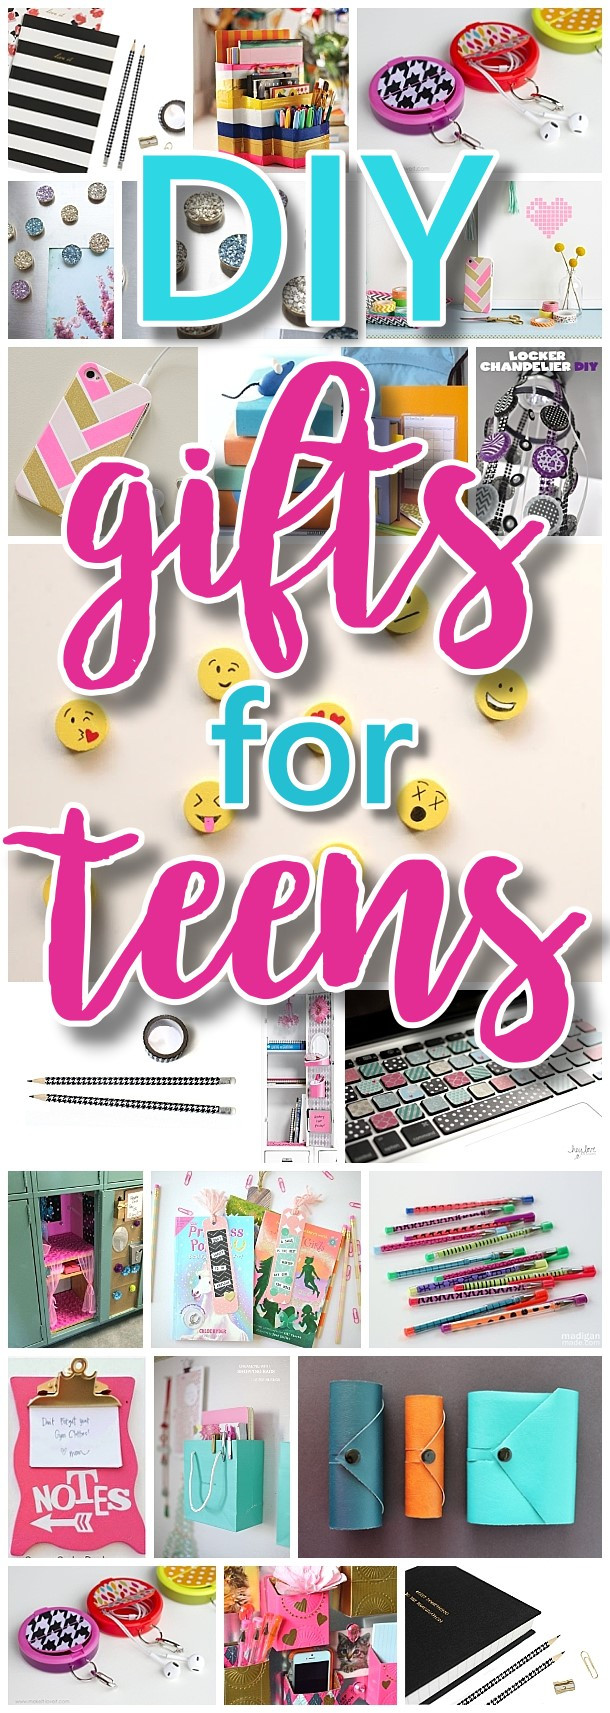 DIY Bff Gifts
 The BEST DIY Gifts for Teens Tweens and Best Friends